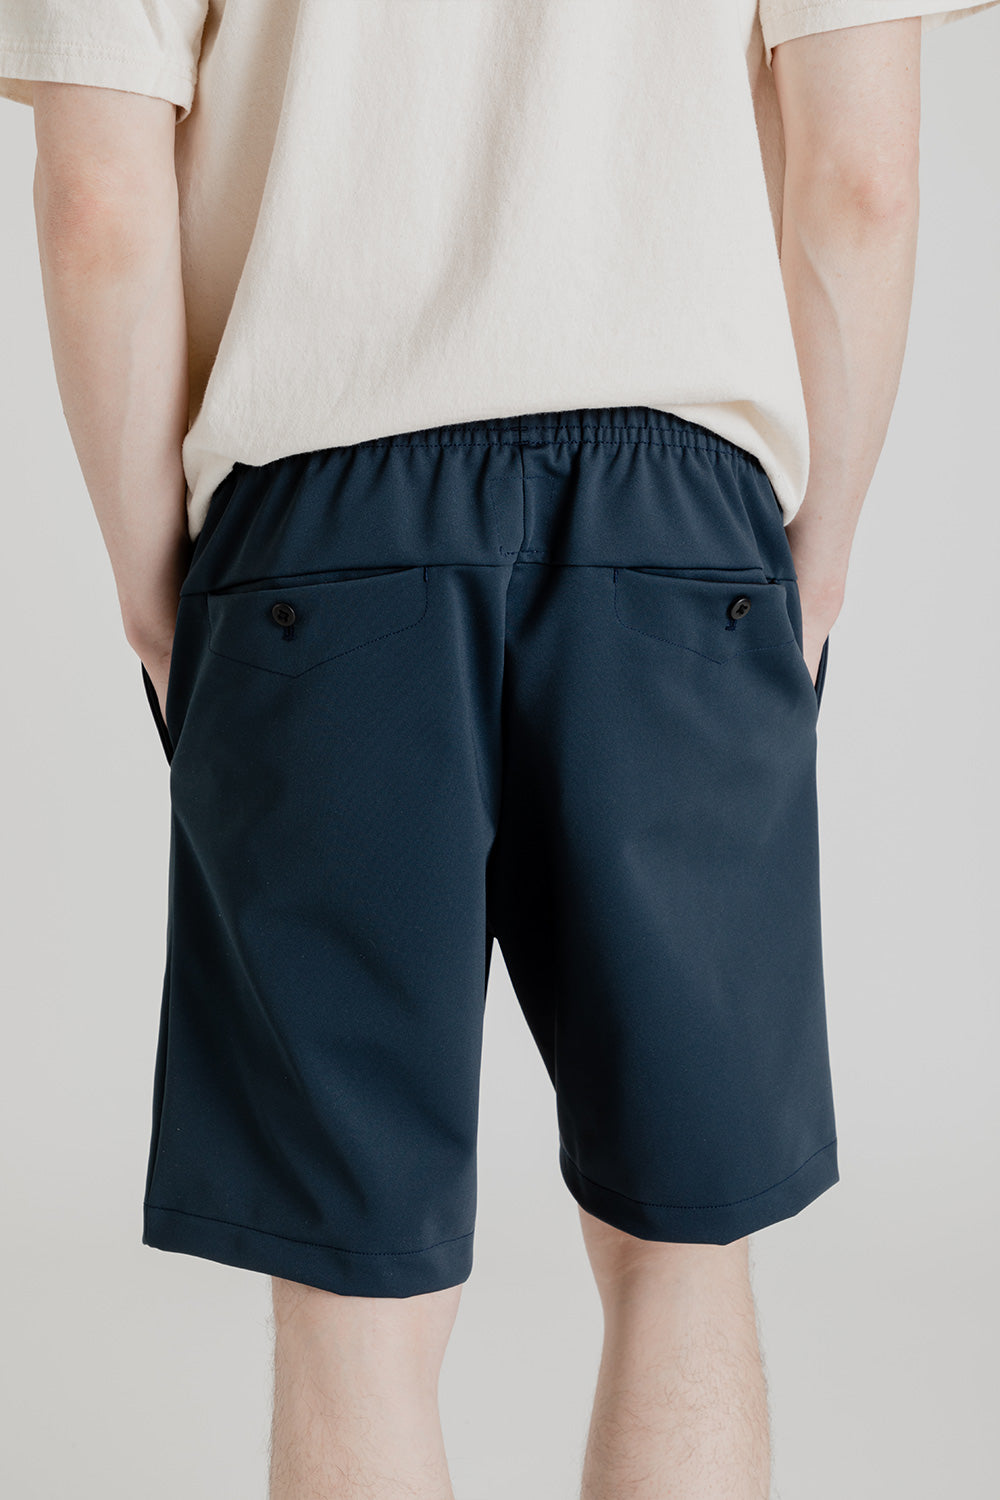 Jackman Jersey Shorts in Stand Navy